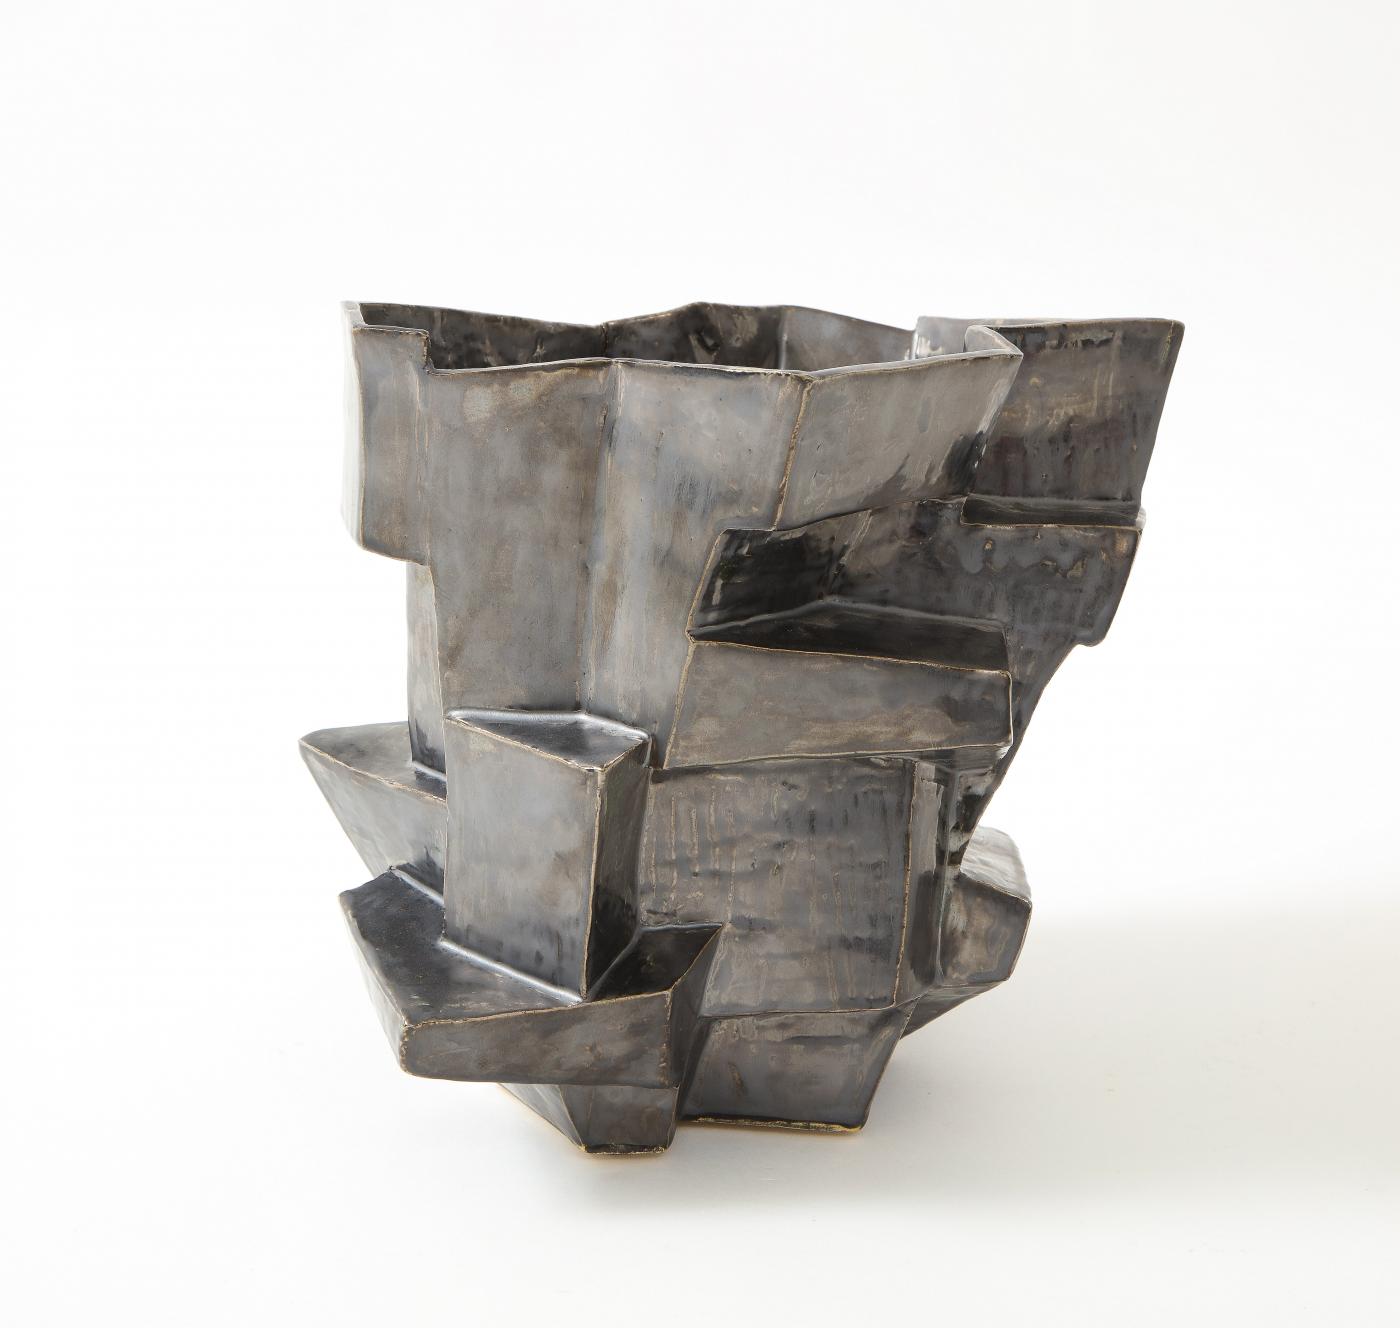 An R.A Pesce wheel-thrown cubist vessel in white stoneware